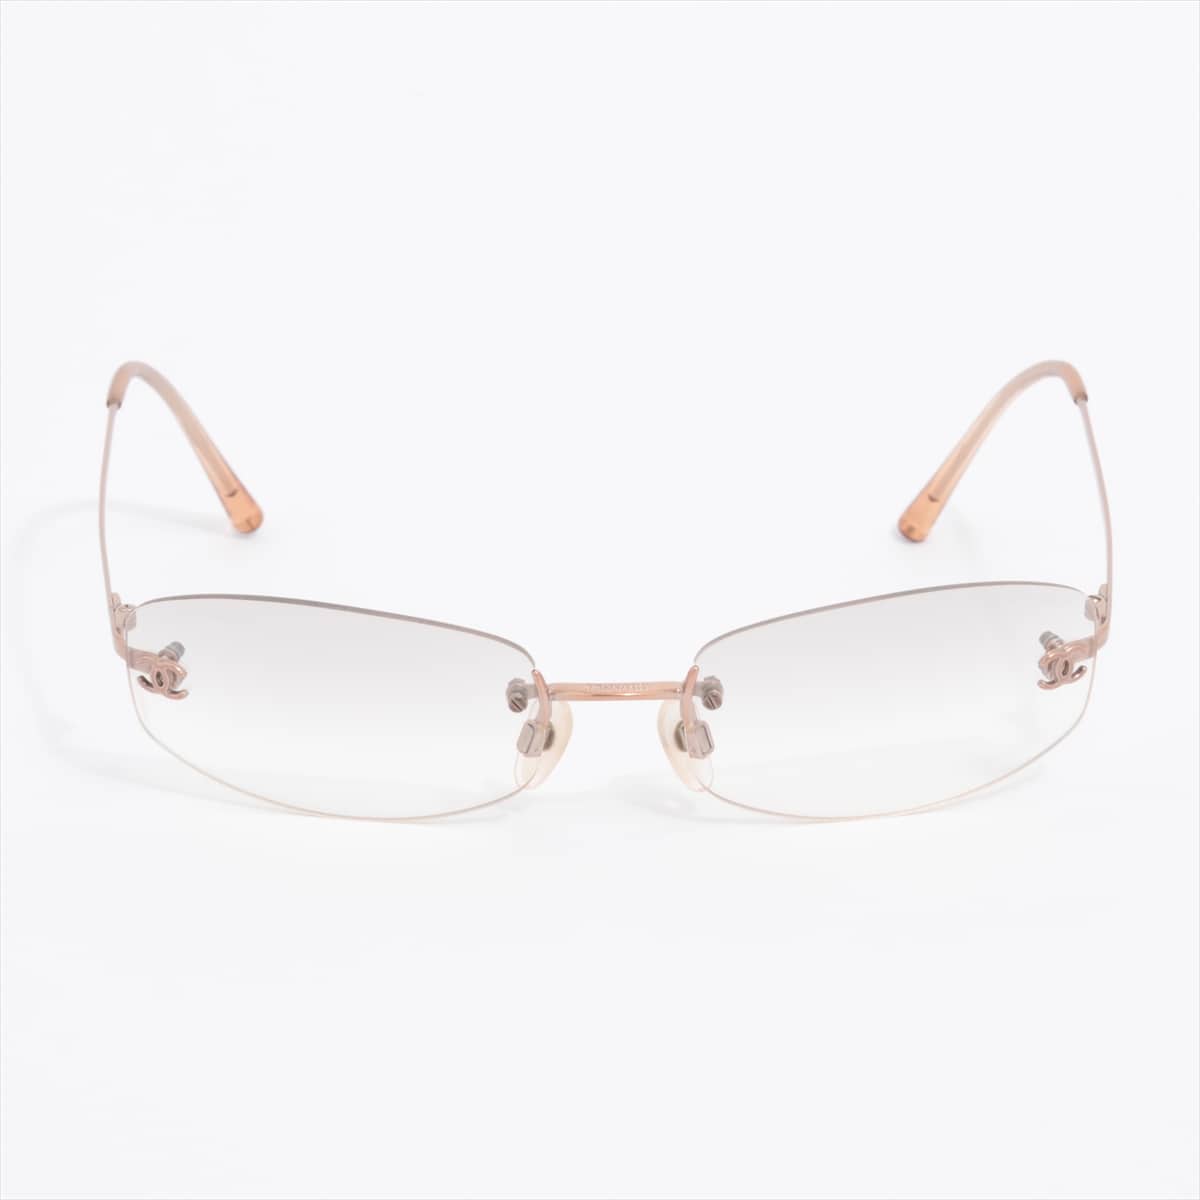 Chanel 4002 Coco Mark Glasses metal Pink